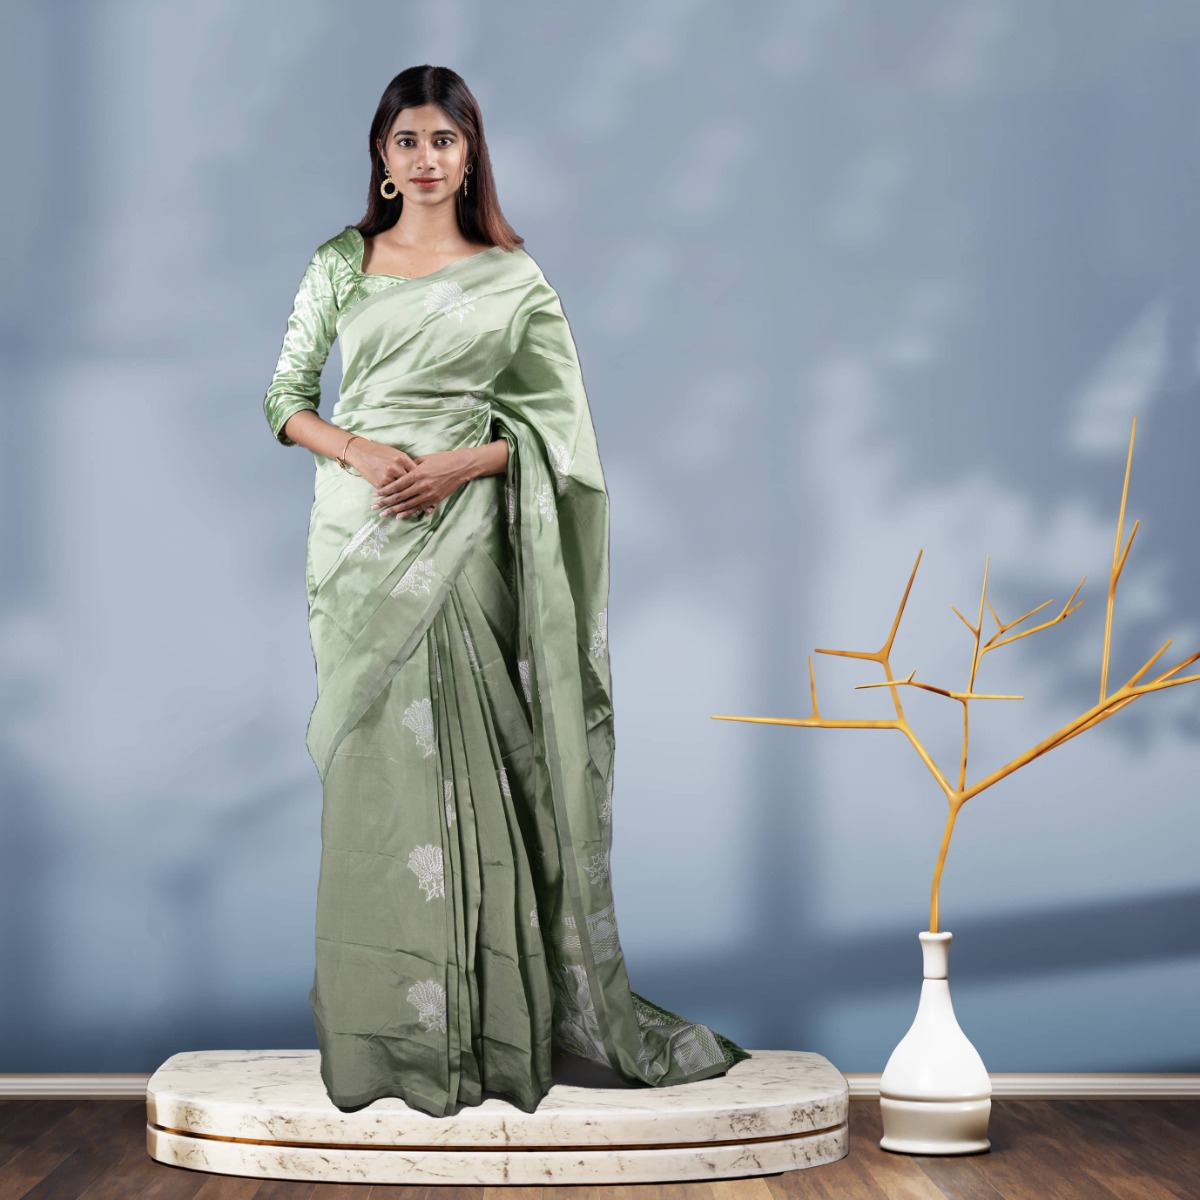 Gorgeous Metallic Look Vichitra Silk Saree with Fancy Embroidered Details